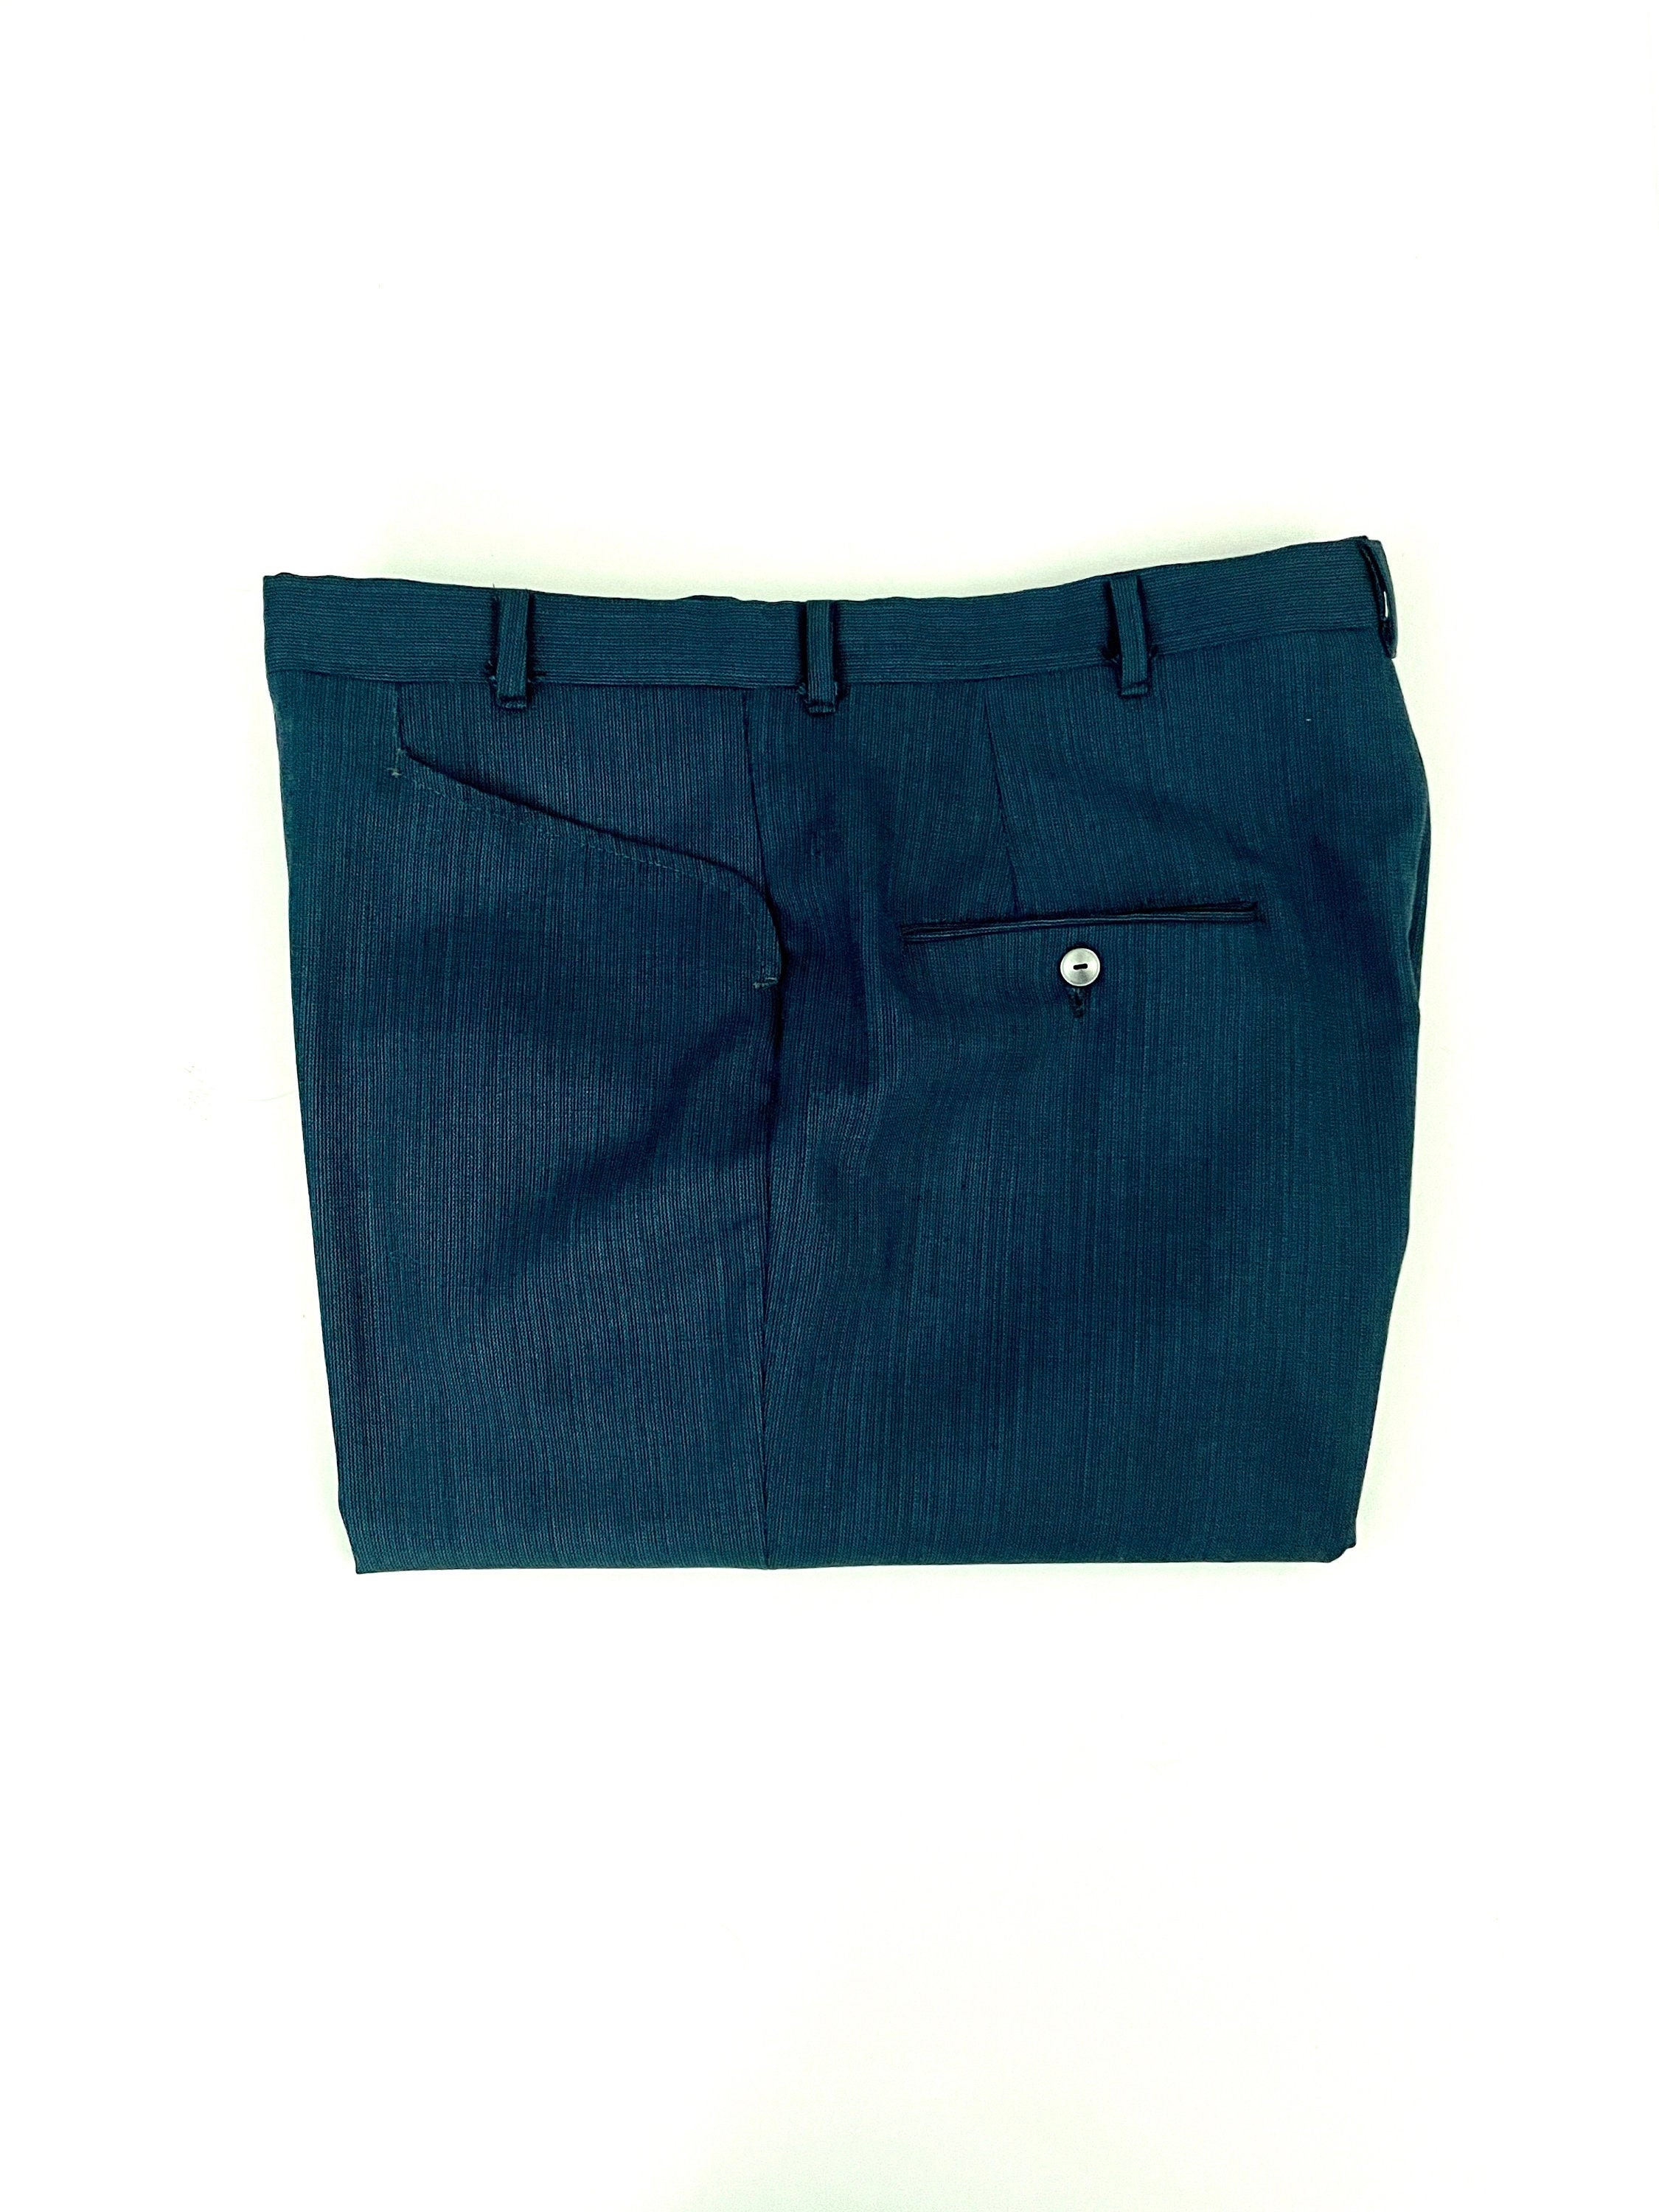 Vintage Men's 70's Teal, Black, Wool Blend, Relaxed Fit, Cuffed Pants | W34